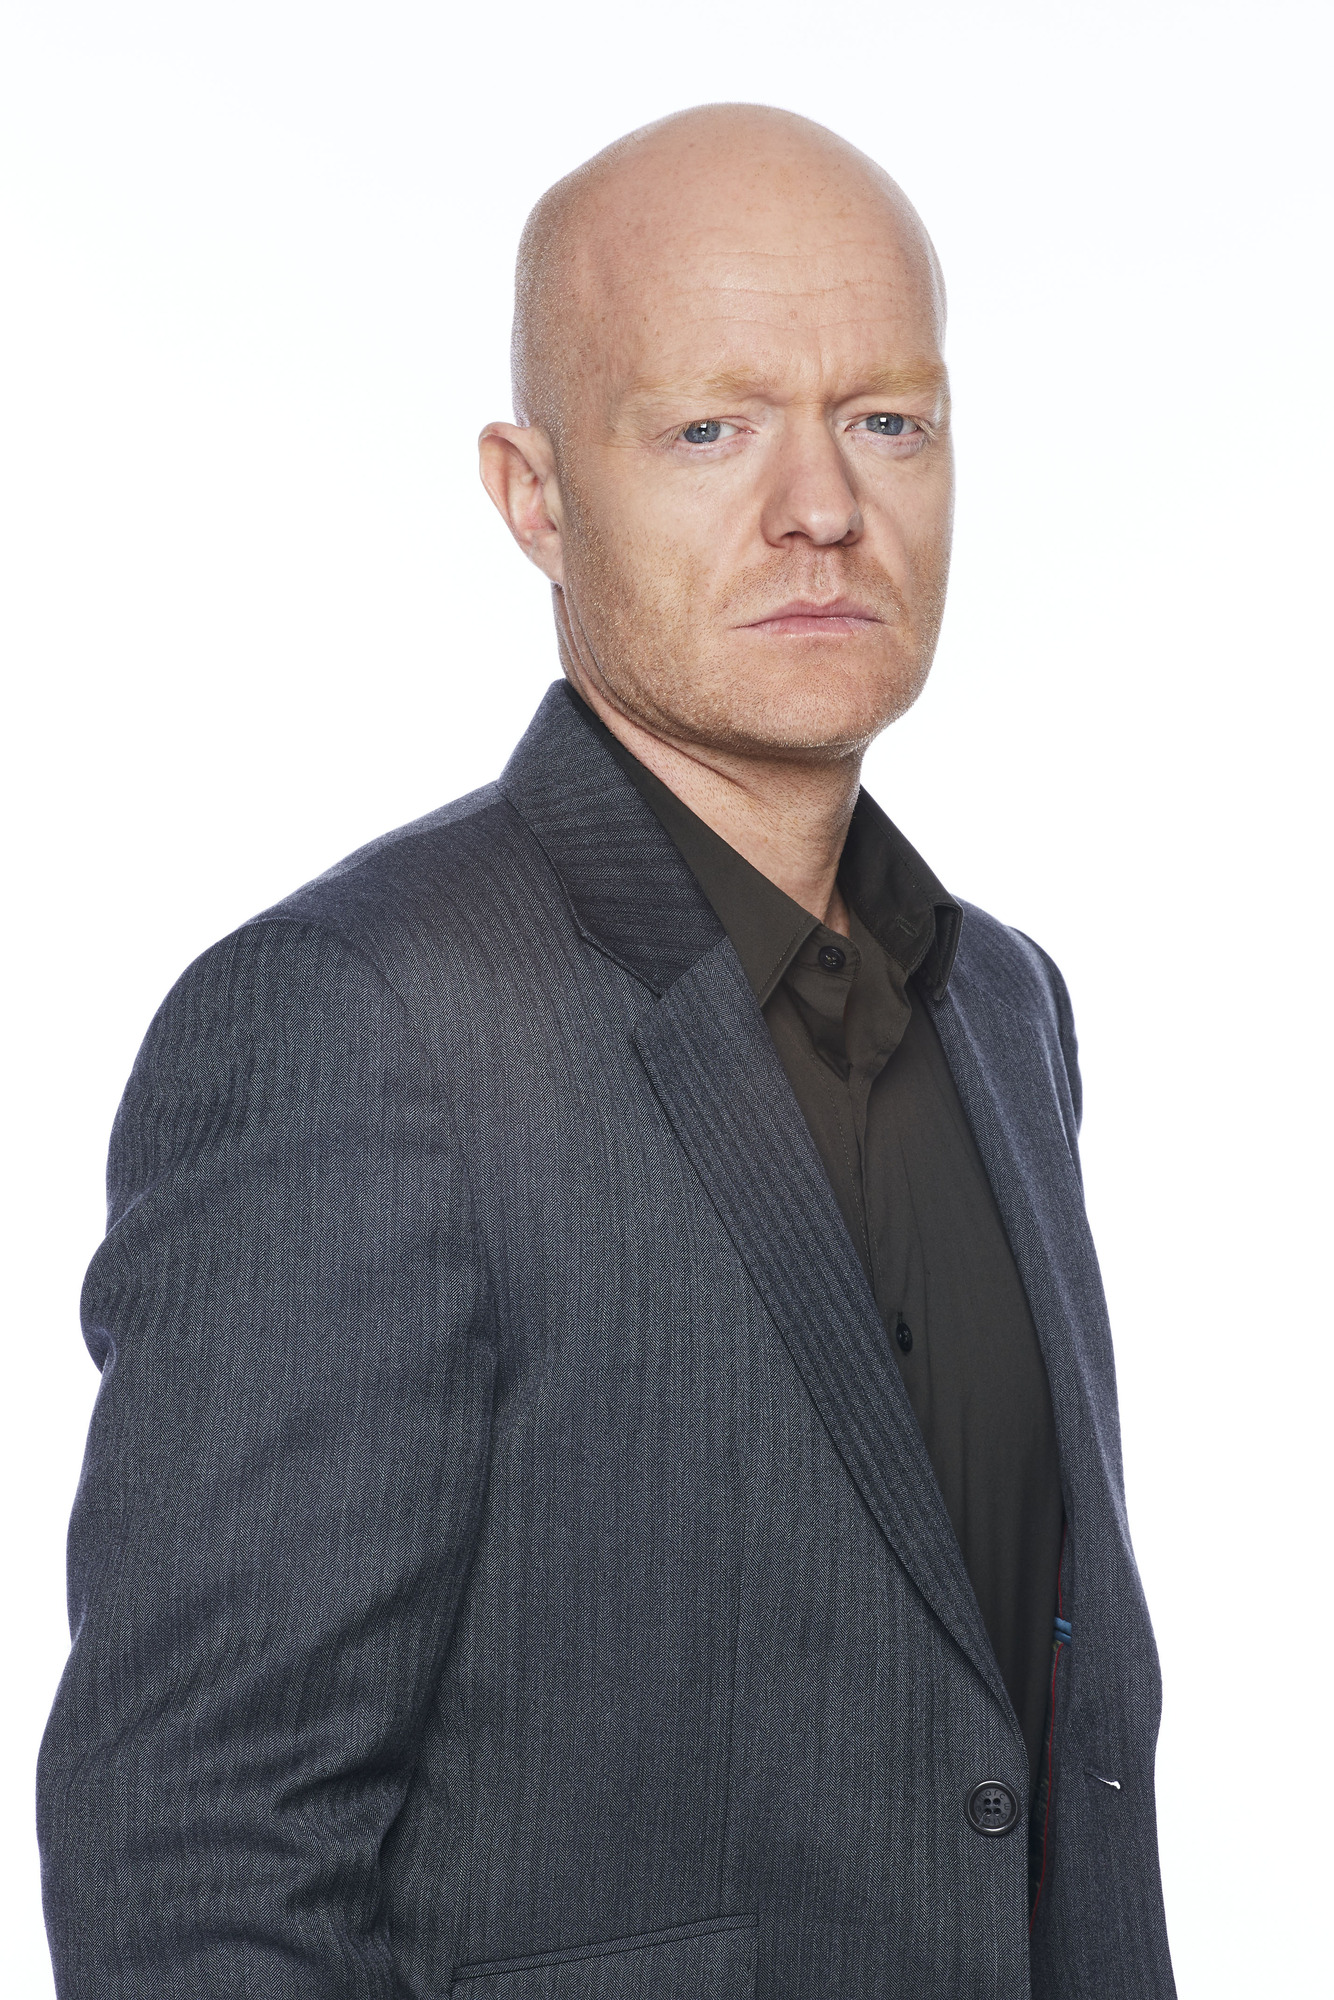 Max Branning played by Jake Wood (Nicky Johnston)